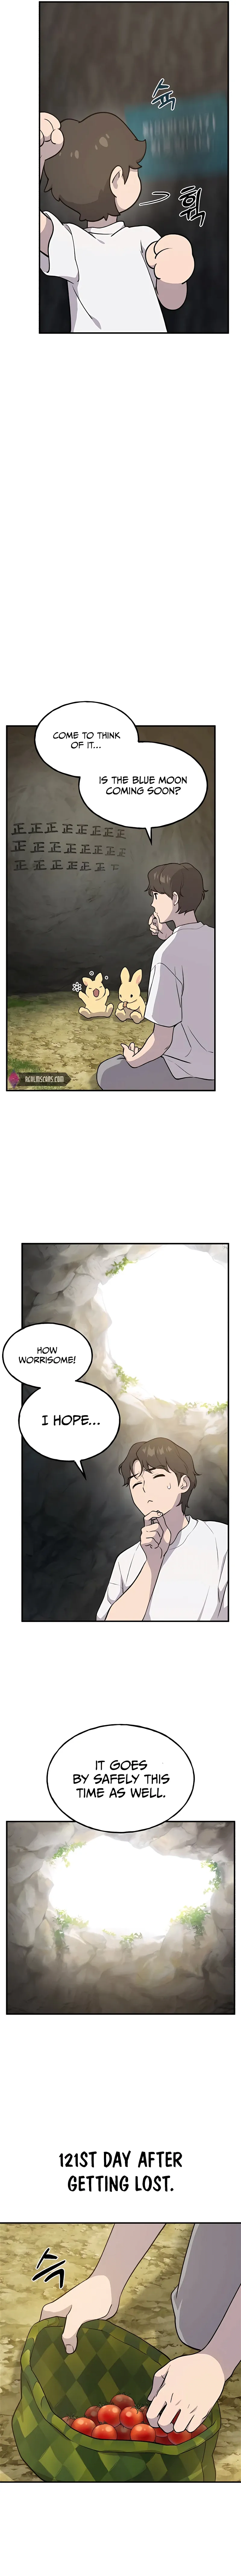 Solo Farming In The Tower Chapter 9 page 15